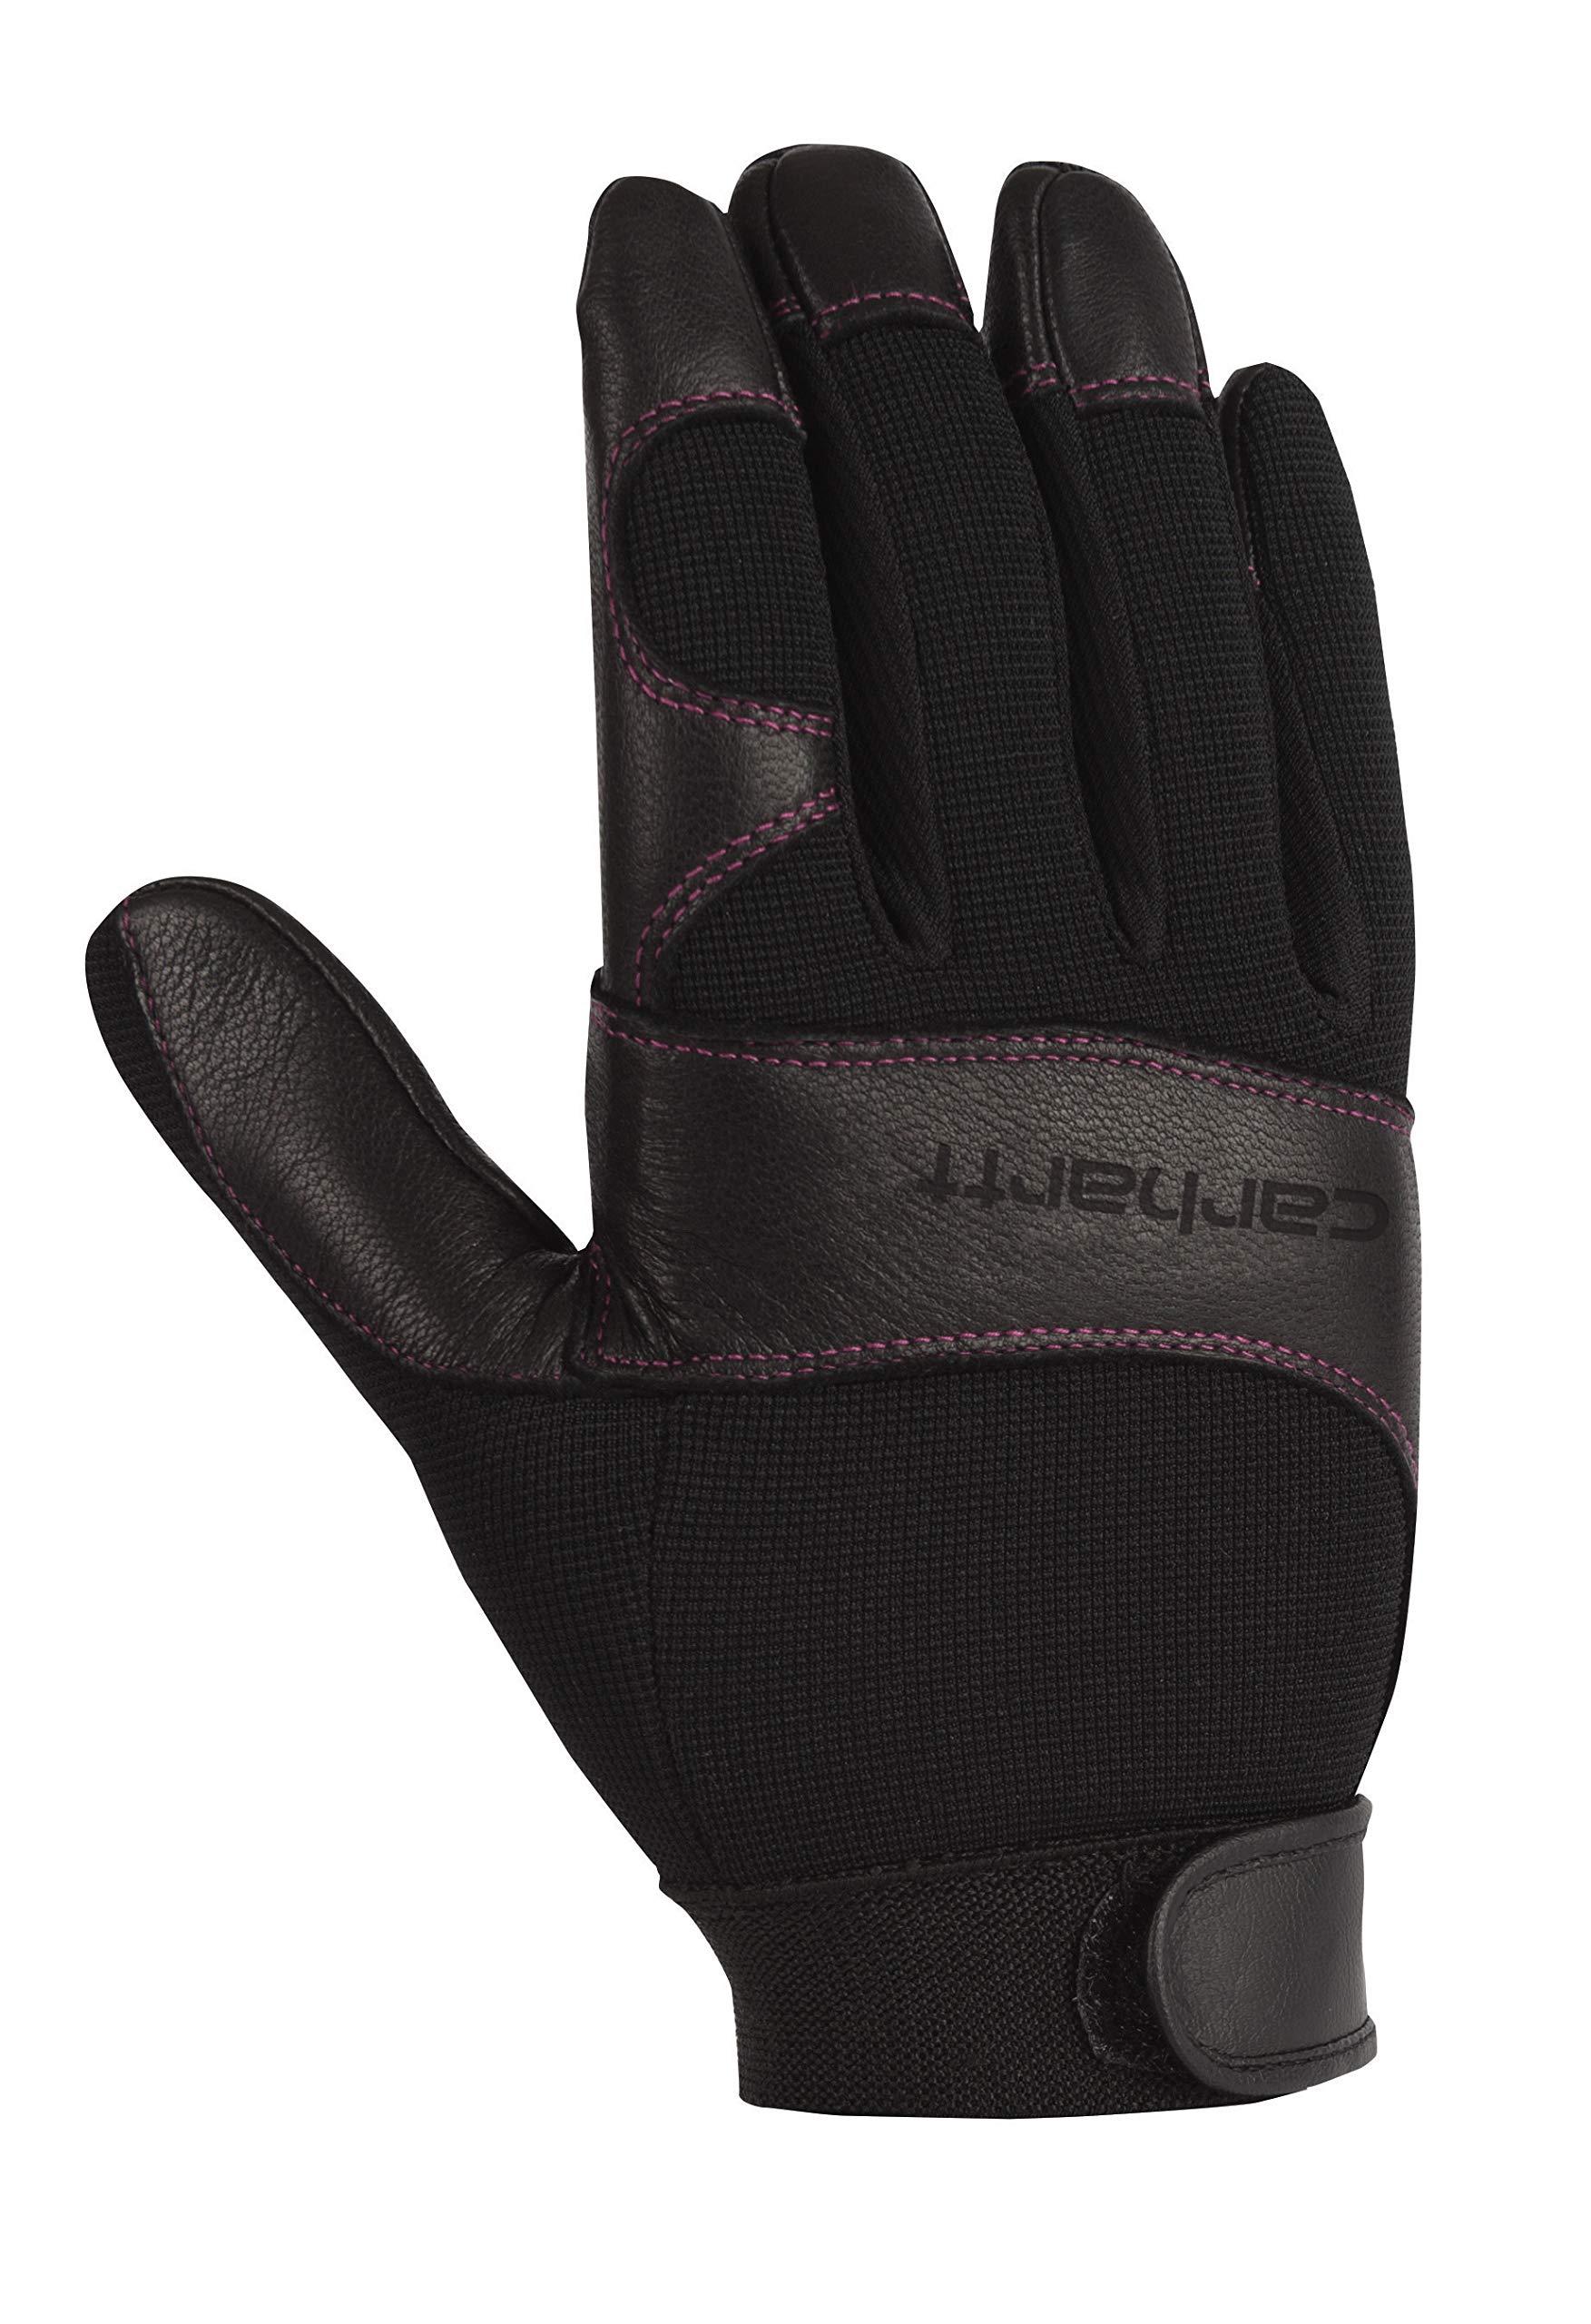 Carhartt Leather Dex Ii High Dexterity Work Glove With System 5 Palm And  Knuckle Protection in Black - Lyst